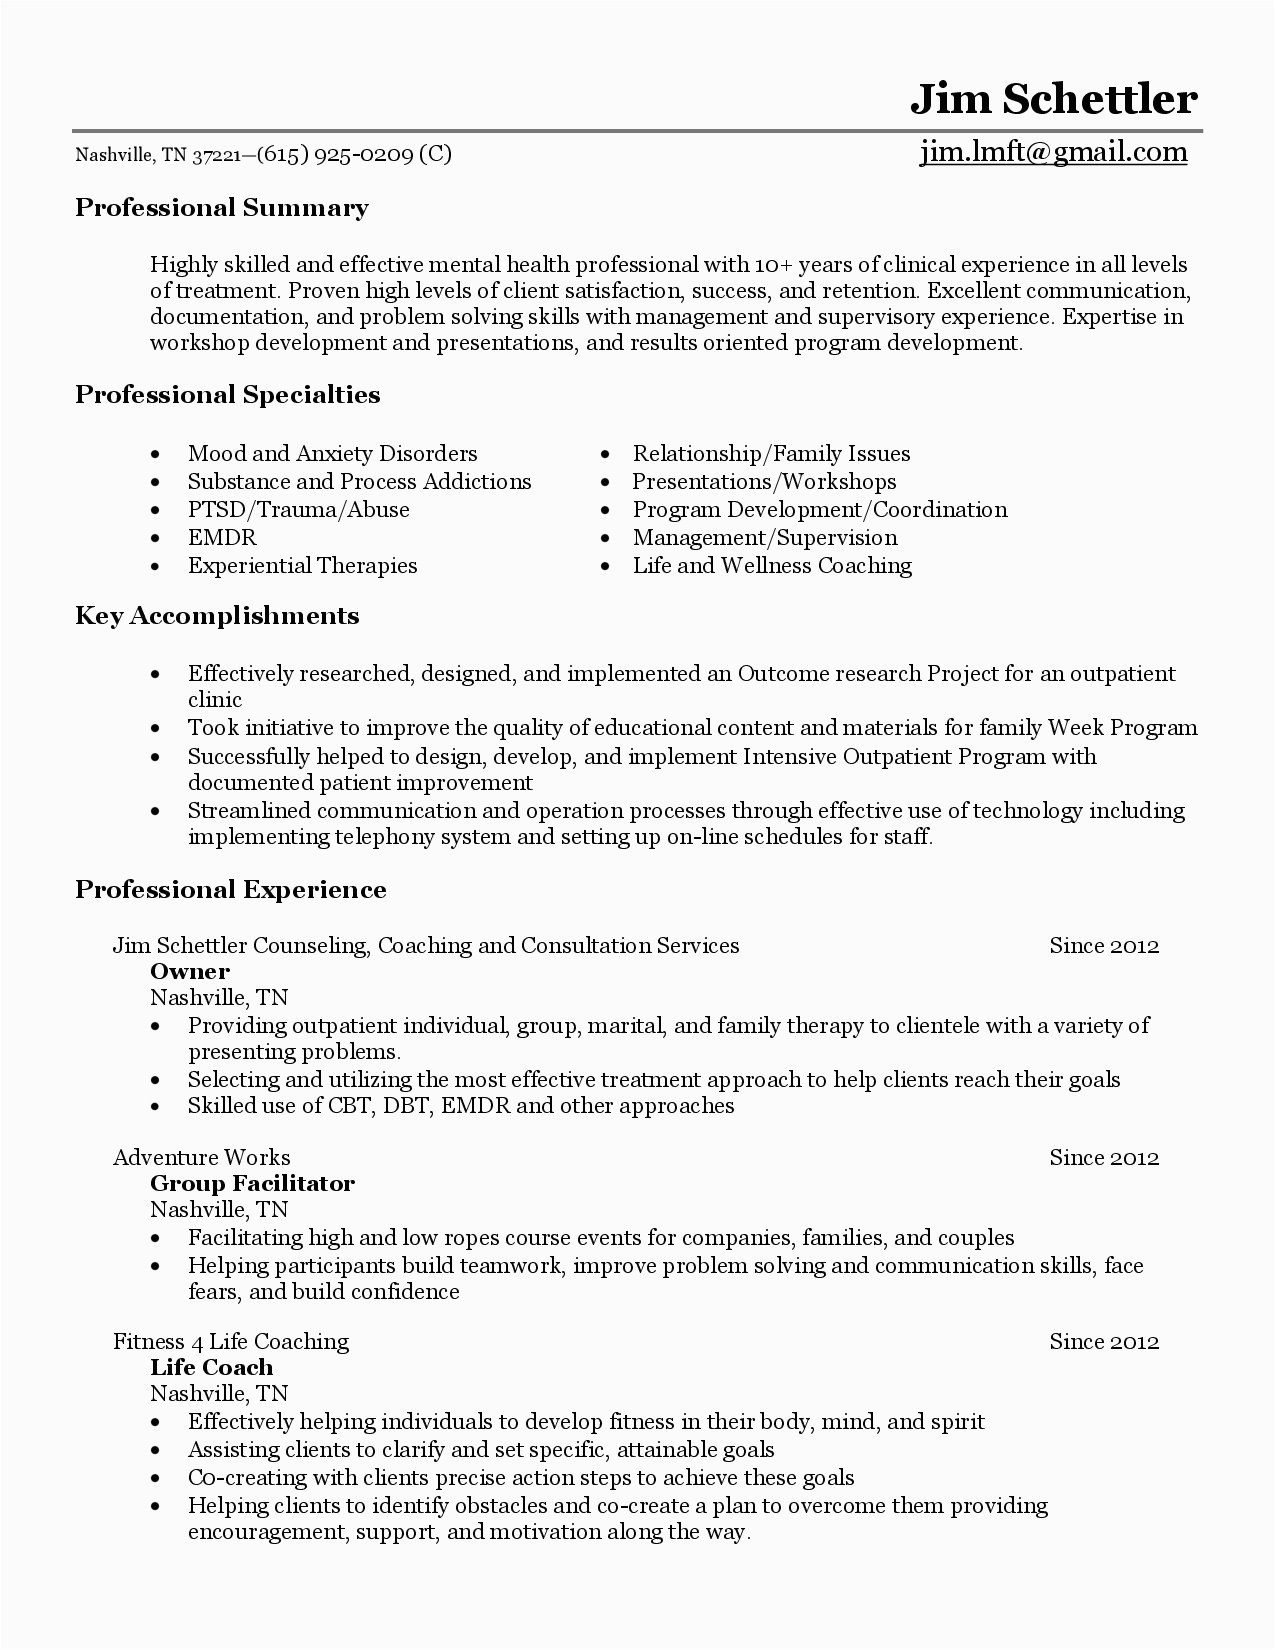 Resume Samples for Mental Health Counselors Counselor Resumes Samples – Salescvfo